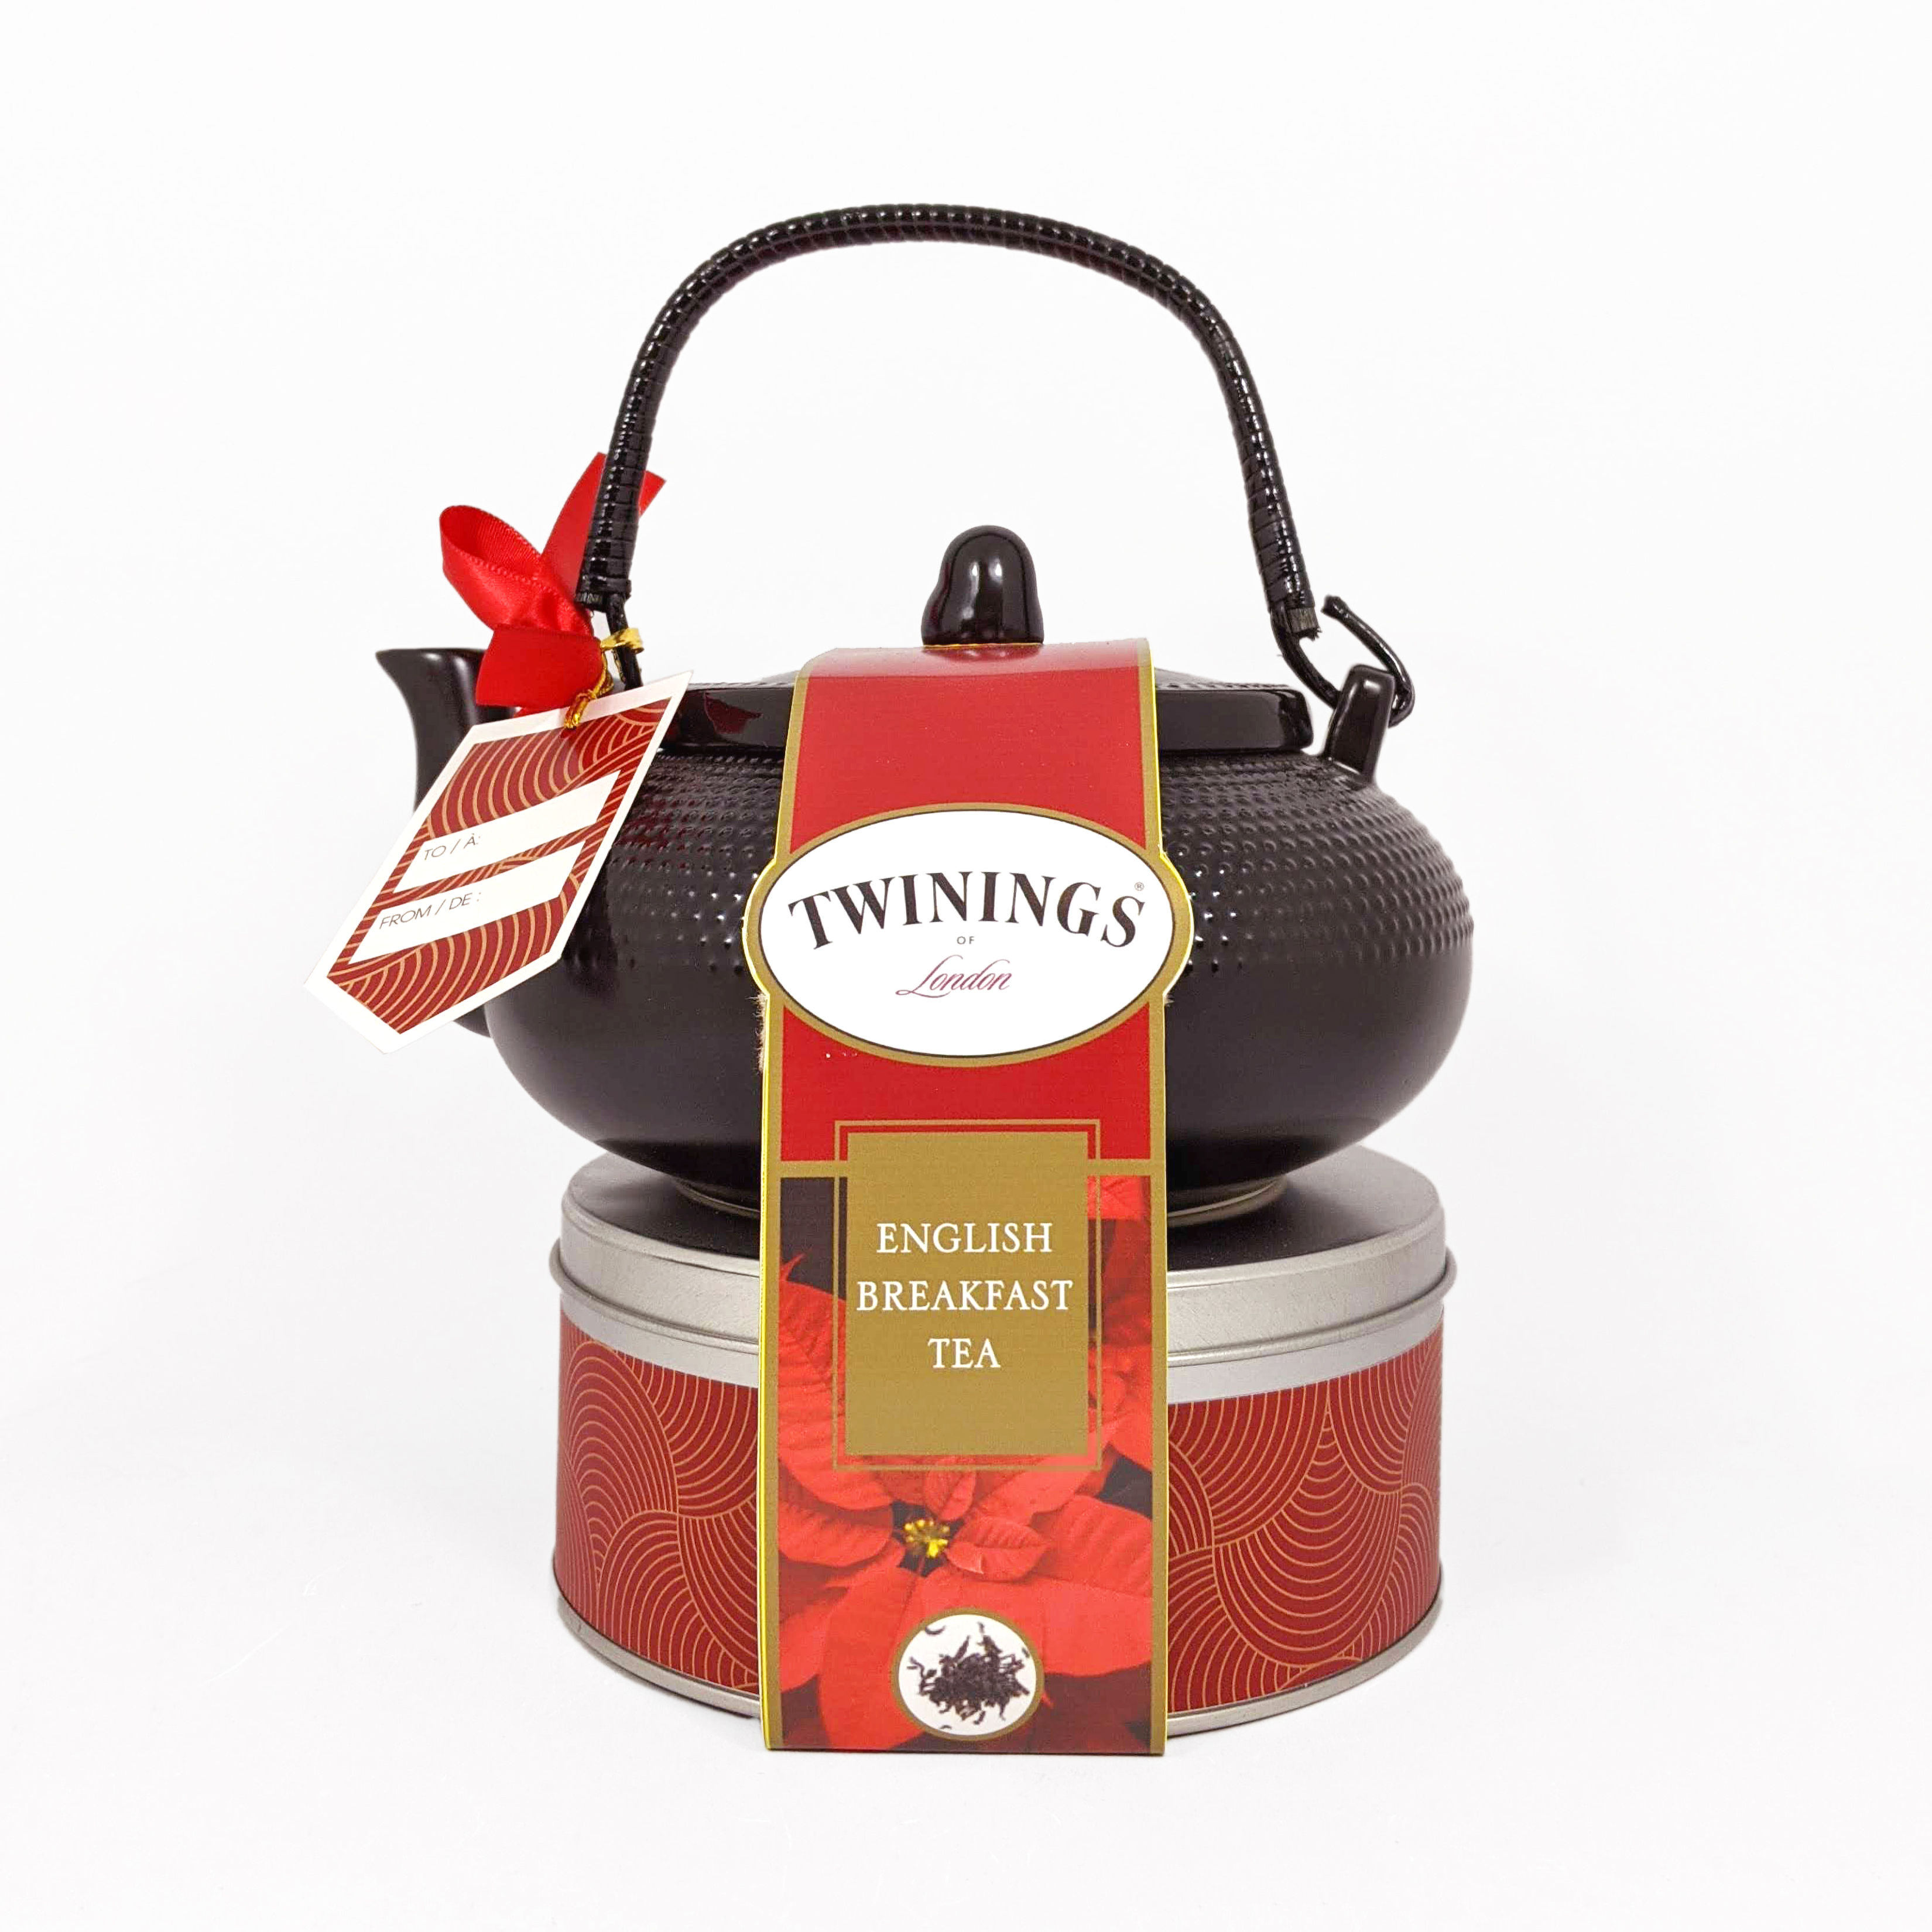 Twinings Ceramic Teapot And Canister - image 1 of 2